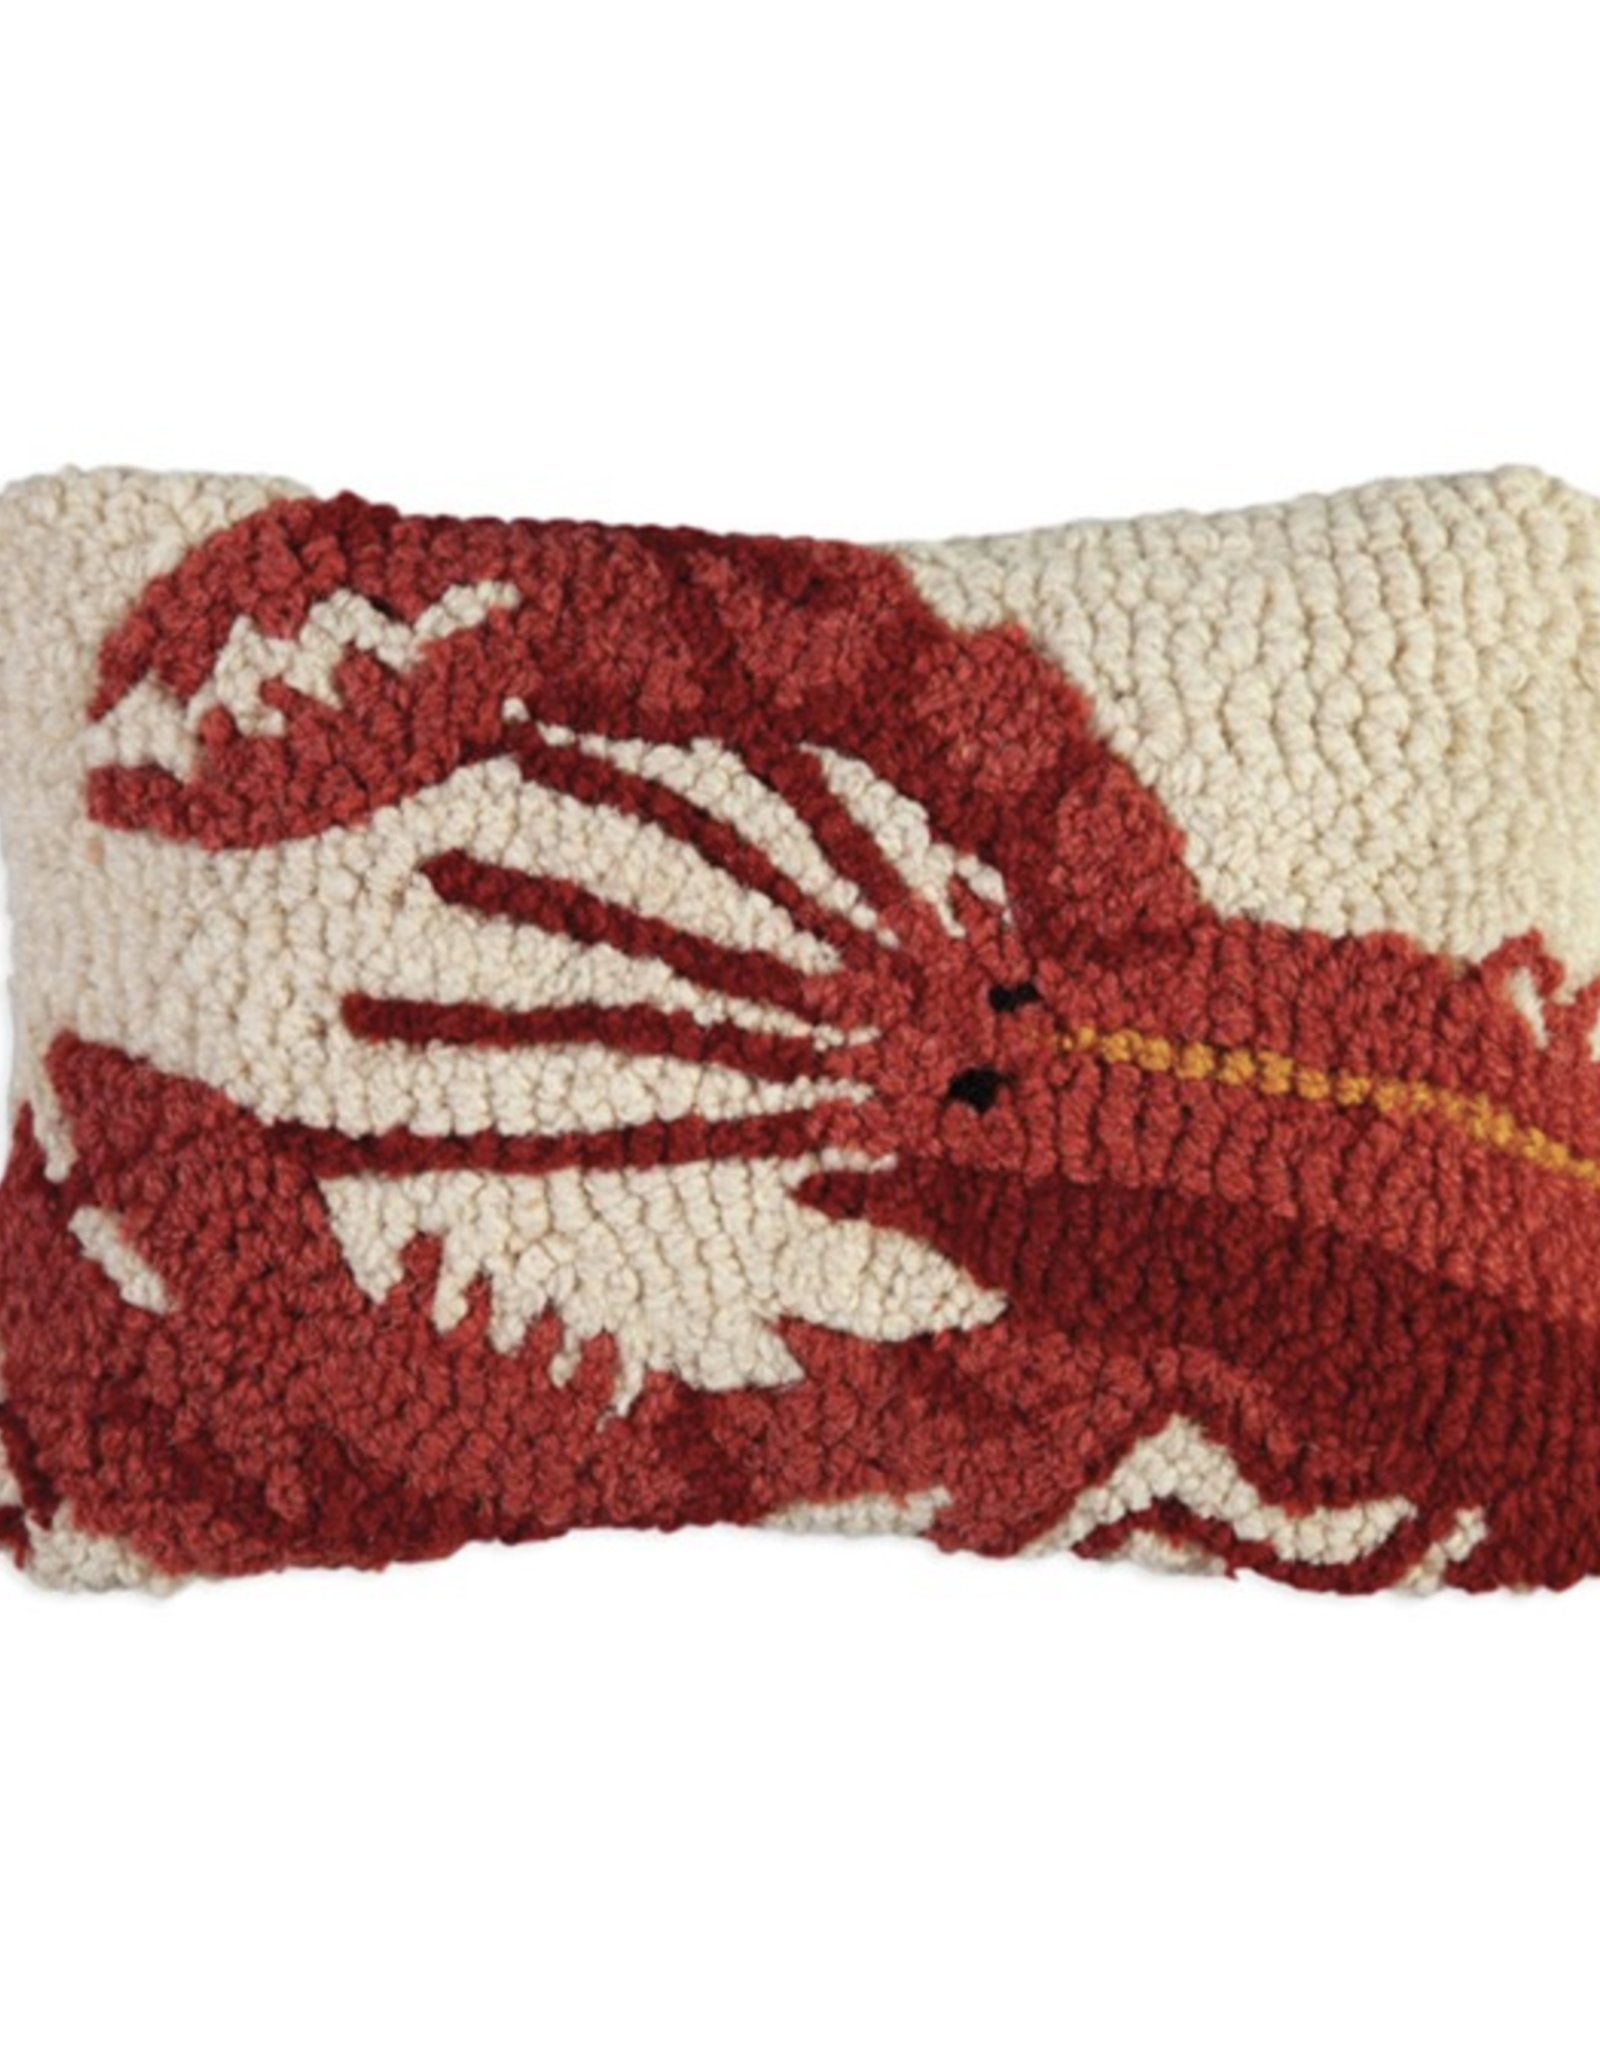 Chandler Four Corners Small Pillow Red Lobster 8x12"